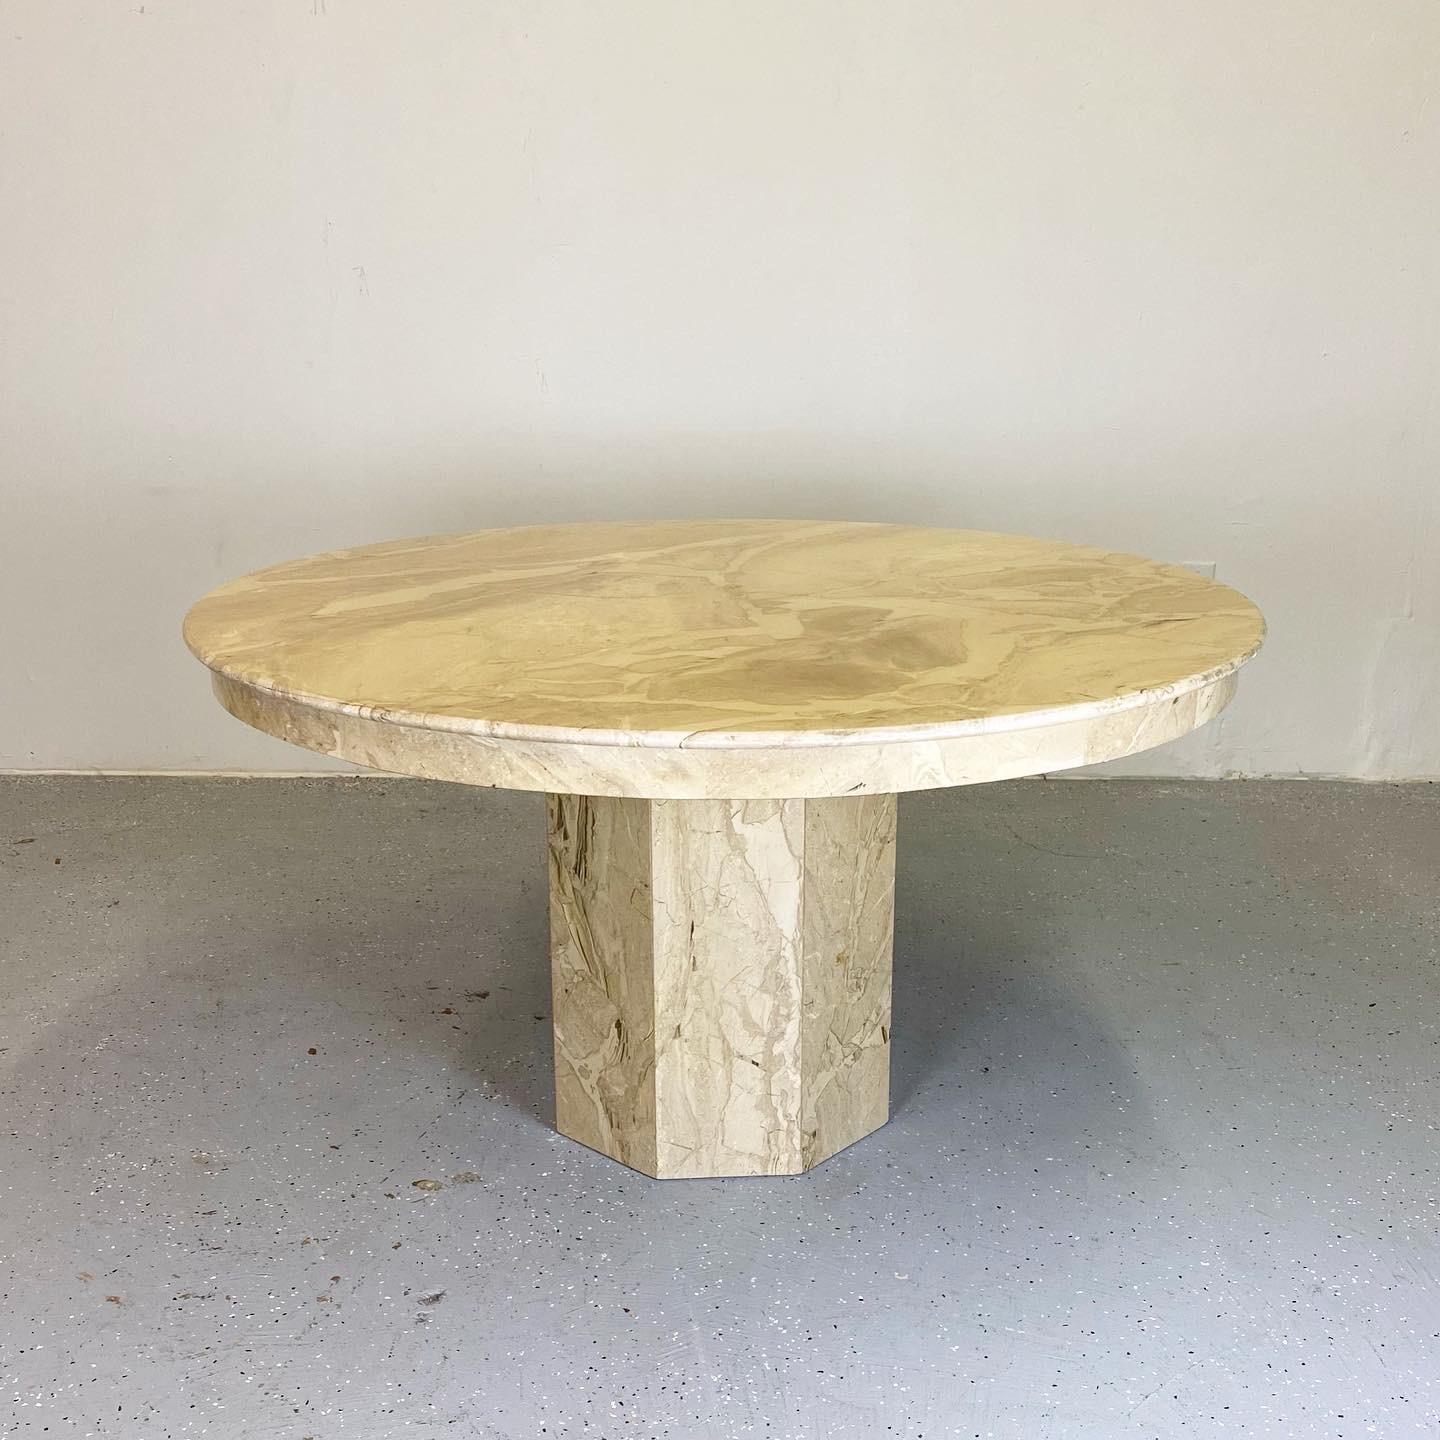 Beautiful vintage dining table with striking marble top. This piece has a minimal design with a warm inviting tone.